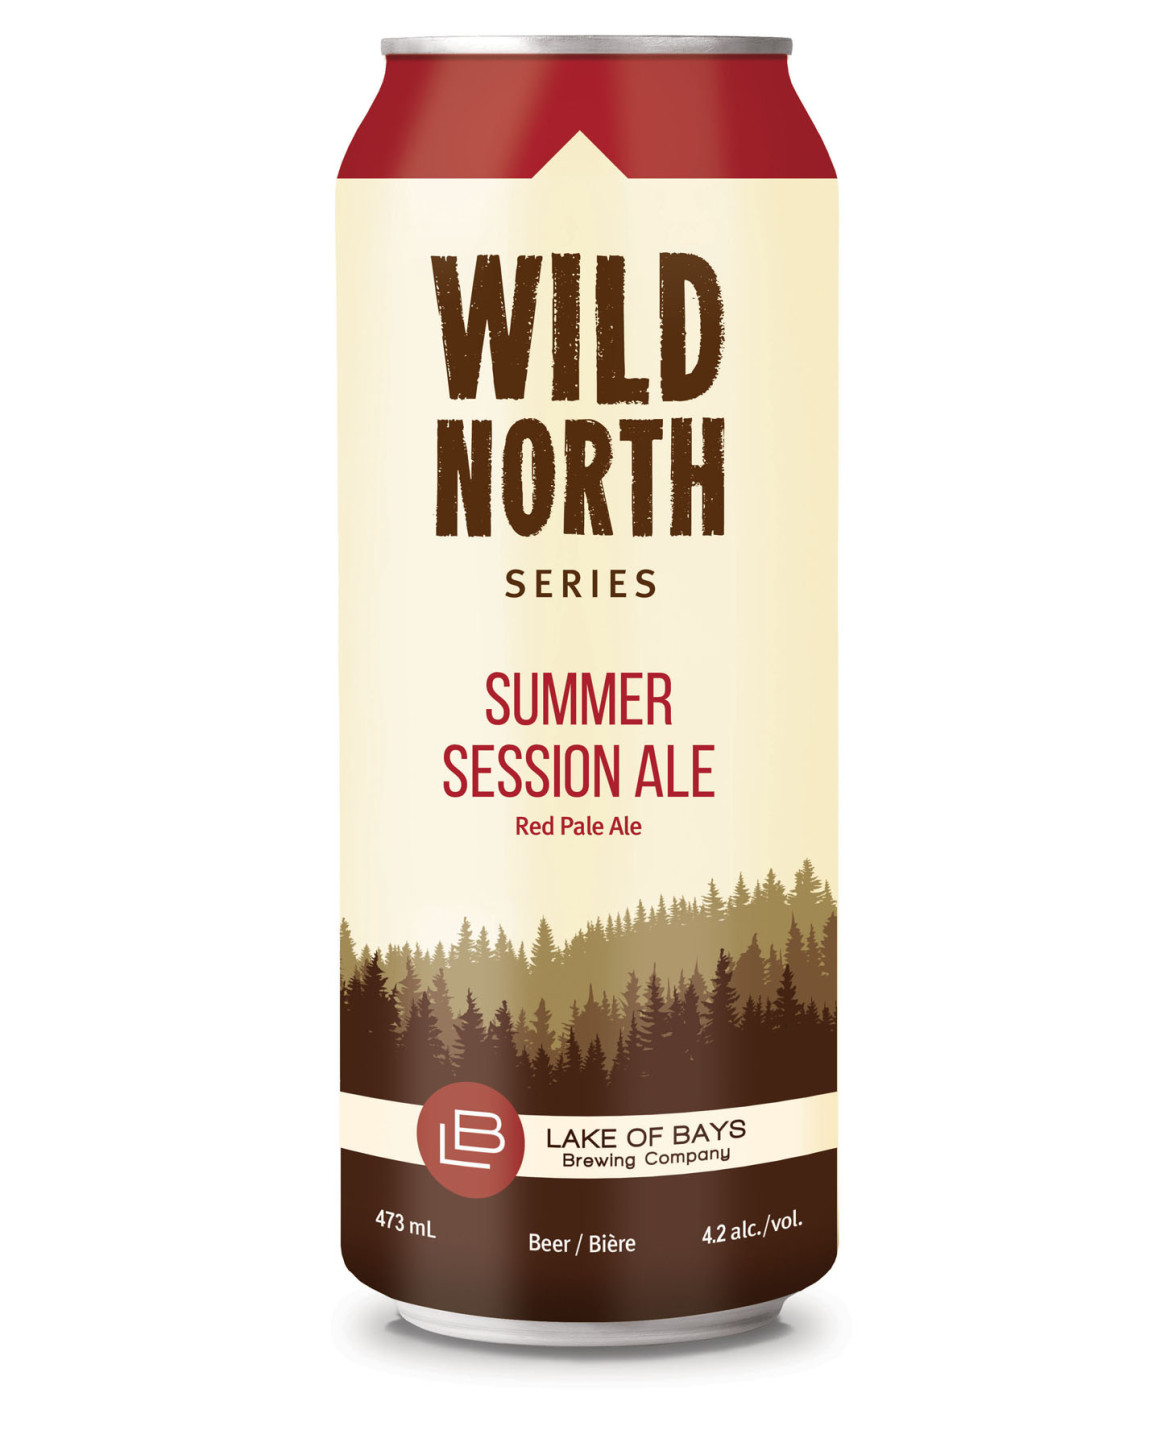 Lake of Bays Wild North package design – Luke Despatie and The Design Firm